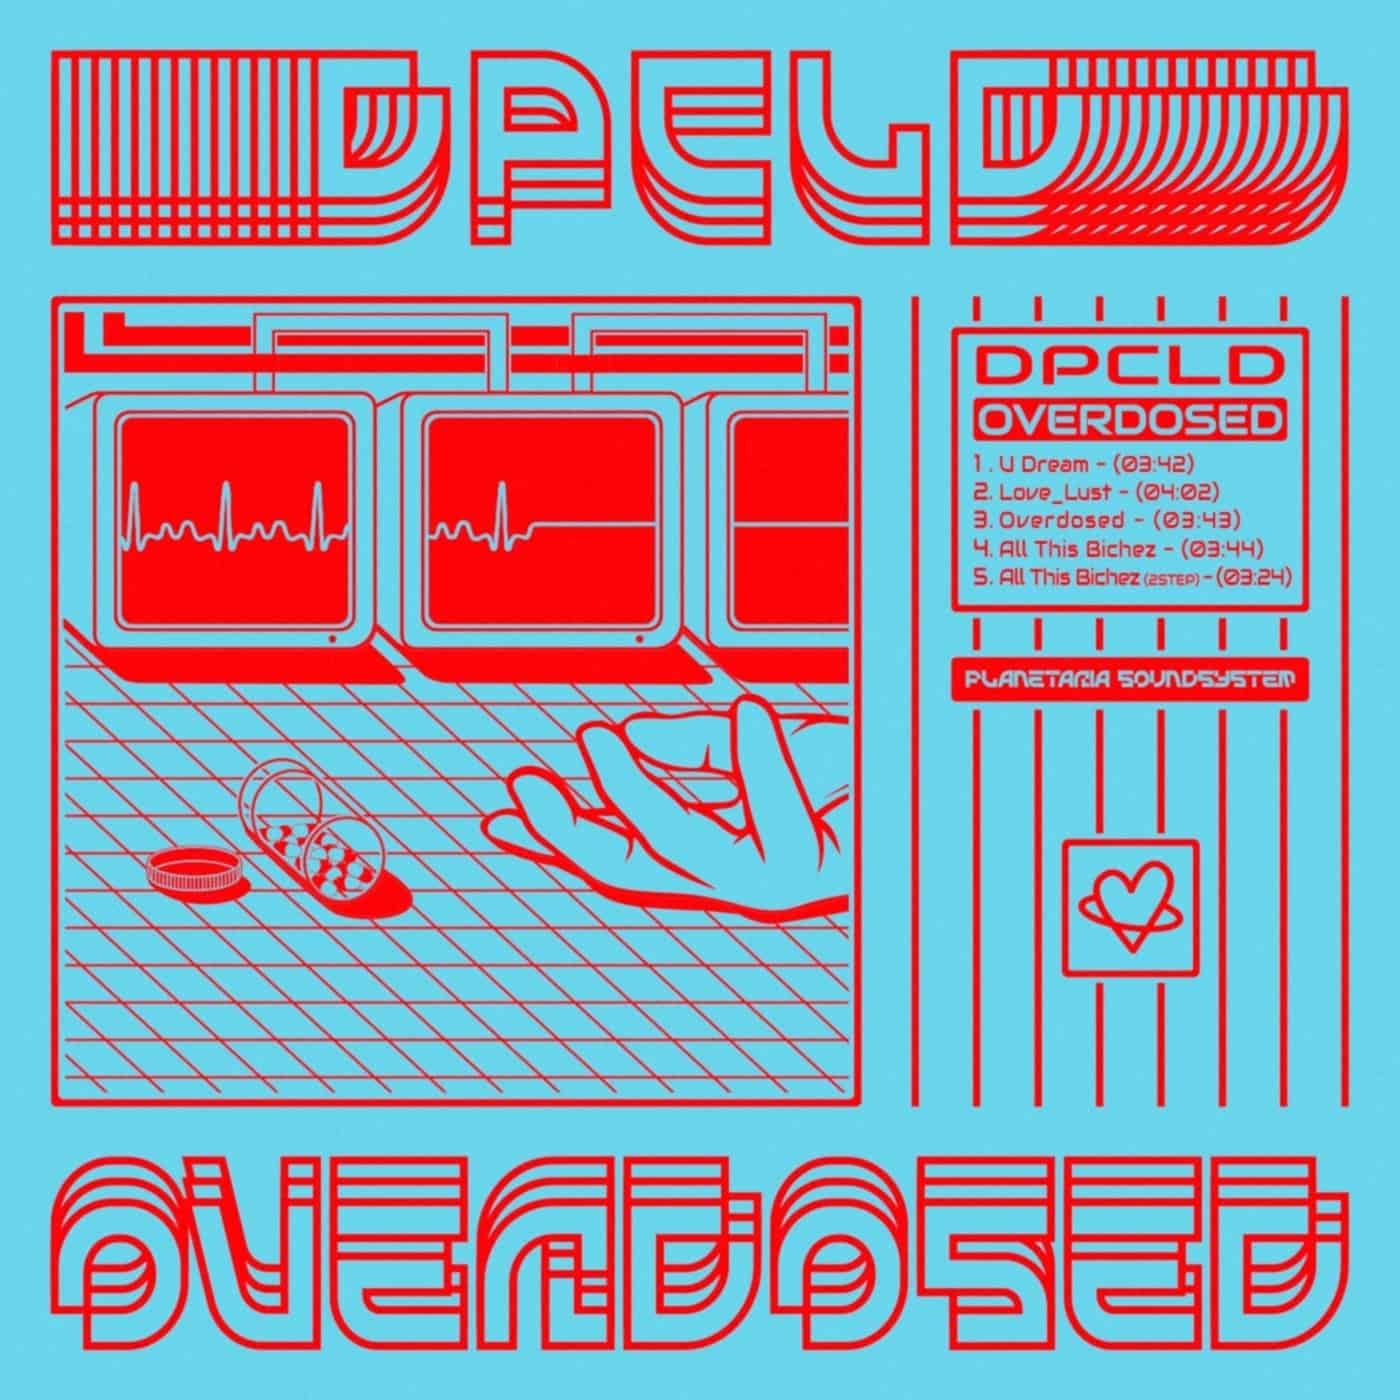 image cover: dpcld - Overdosed / PS005